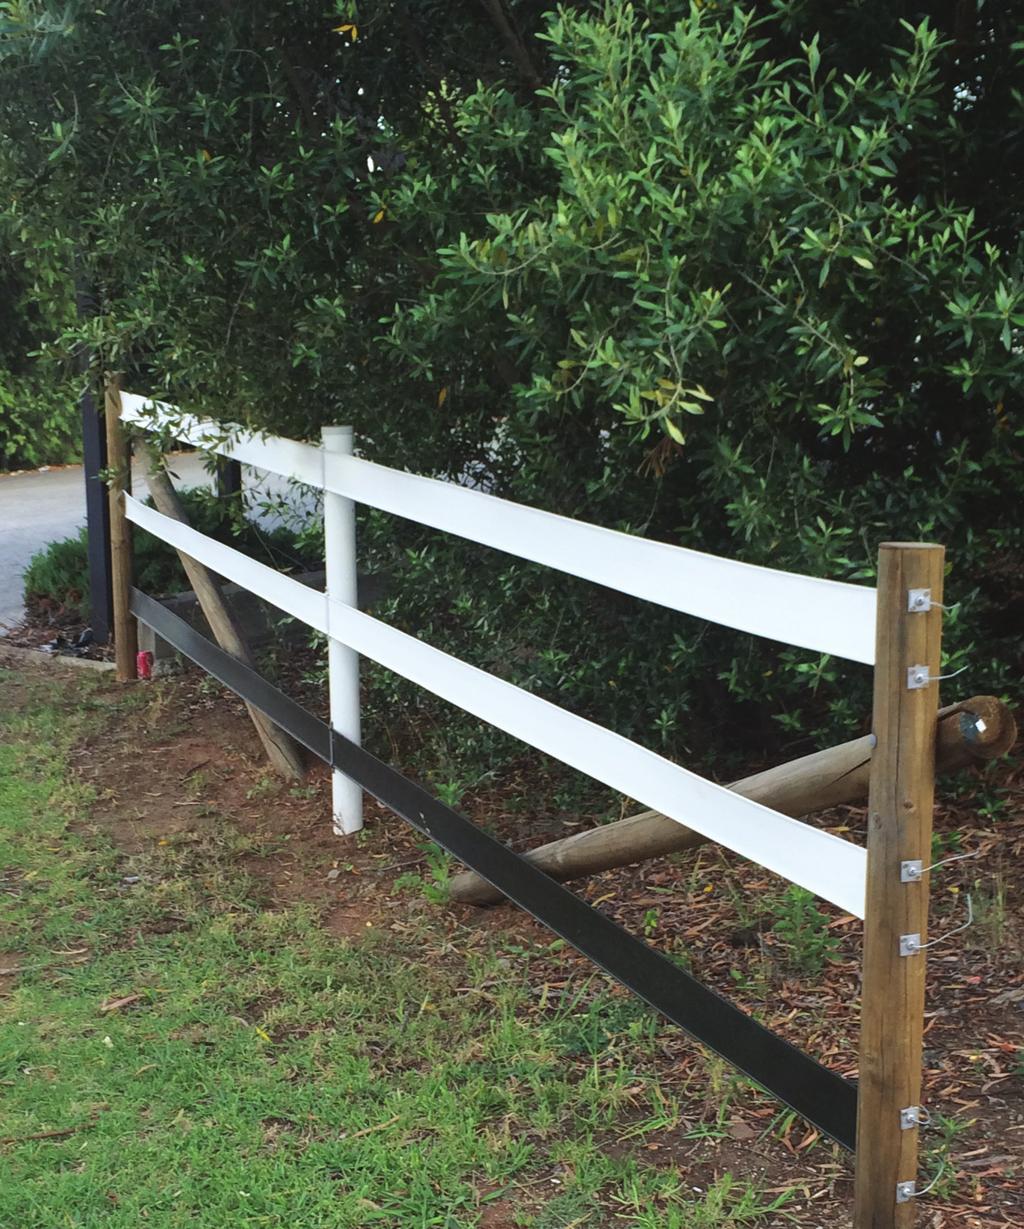 How To Install the Bounce Back Horse Fence Including Tool Preparation The information provided is suggested only.